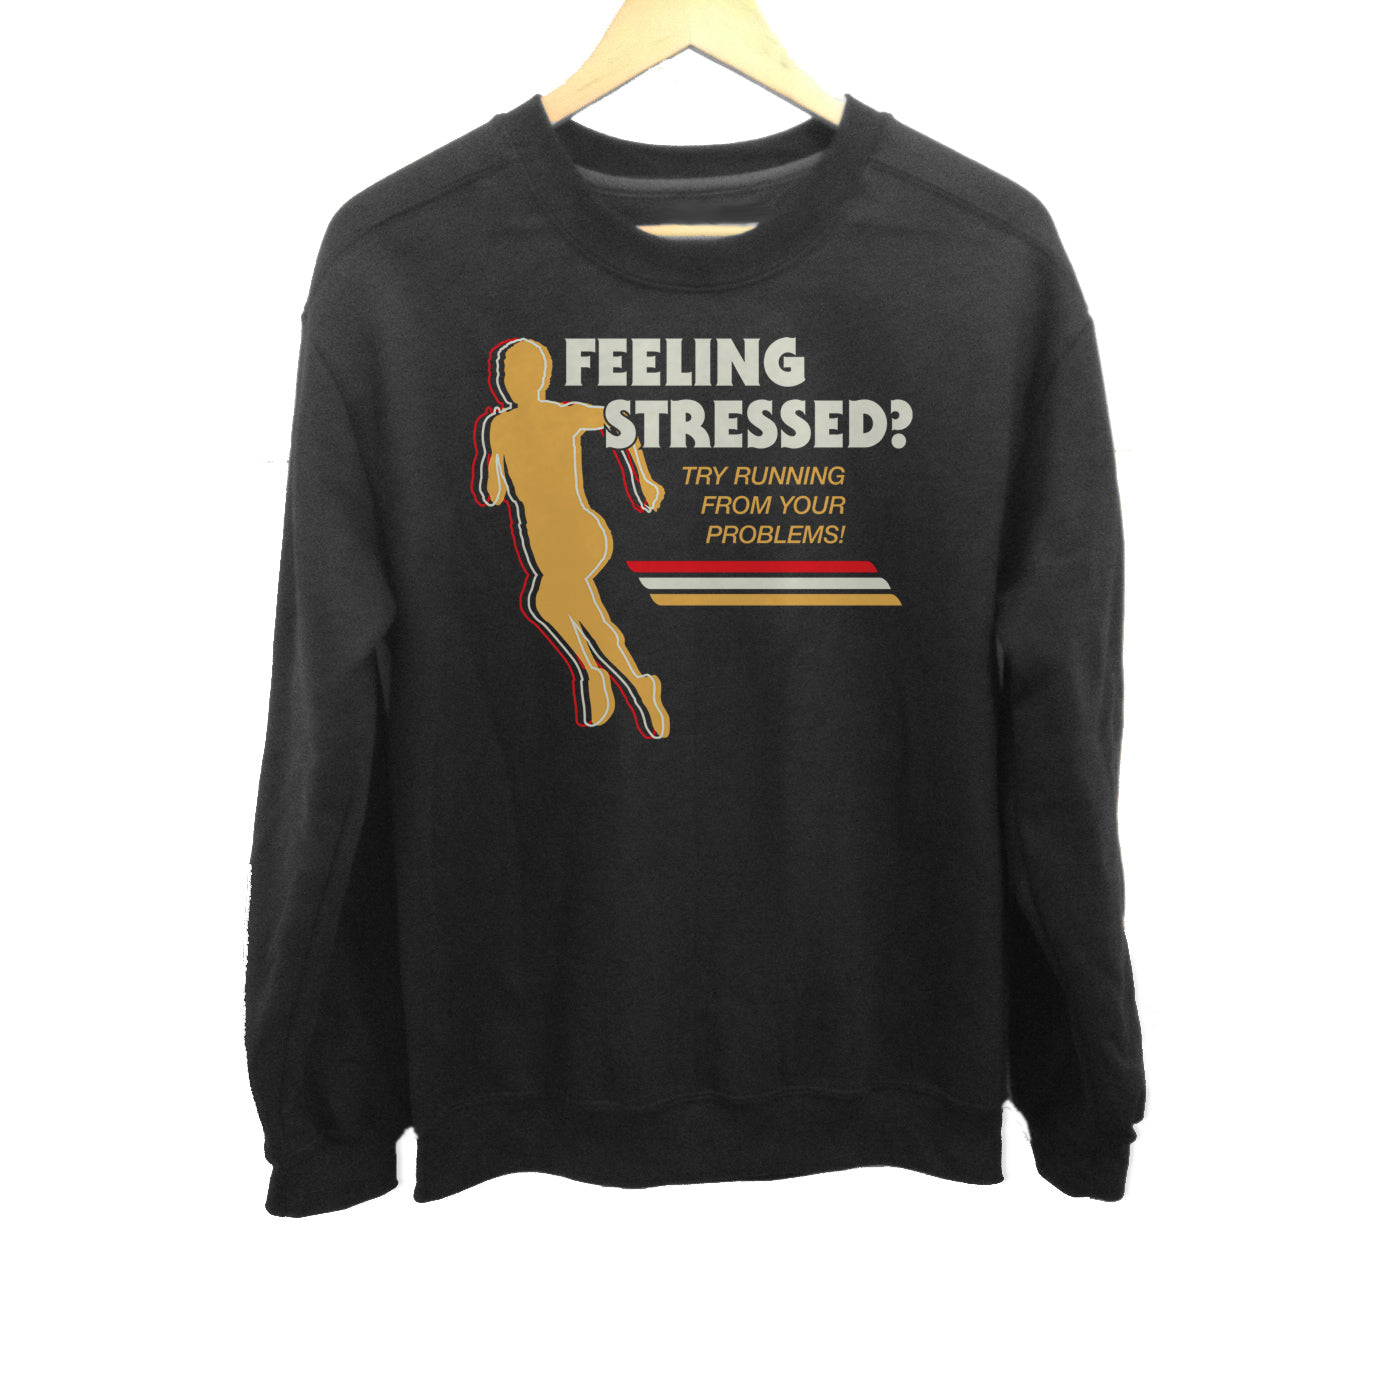 Unisex Feeling Stressed? Try Running from Your Problems Sweatshirt